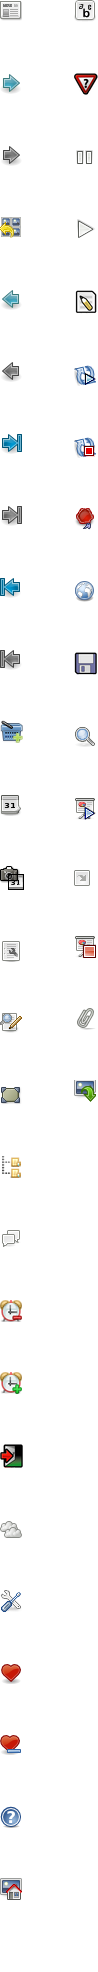 extensions/hr_os/icon/SPRITE.png